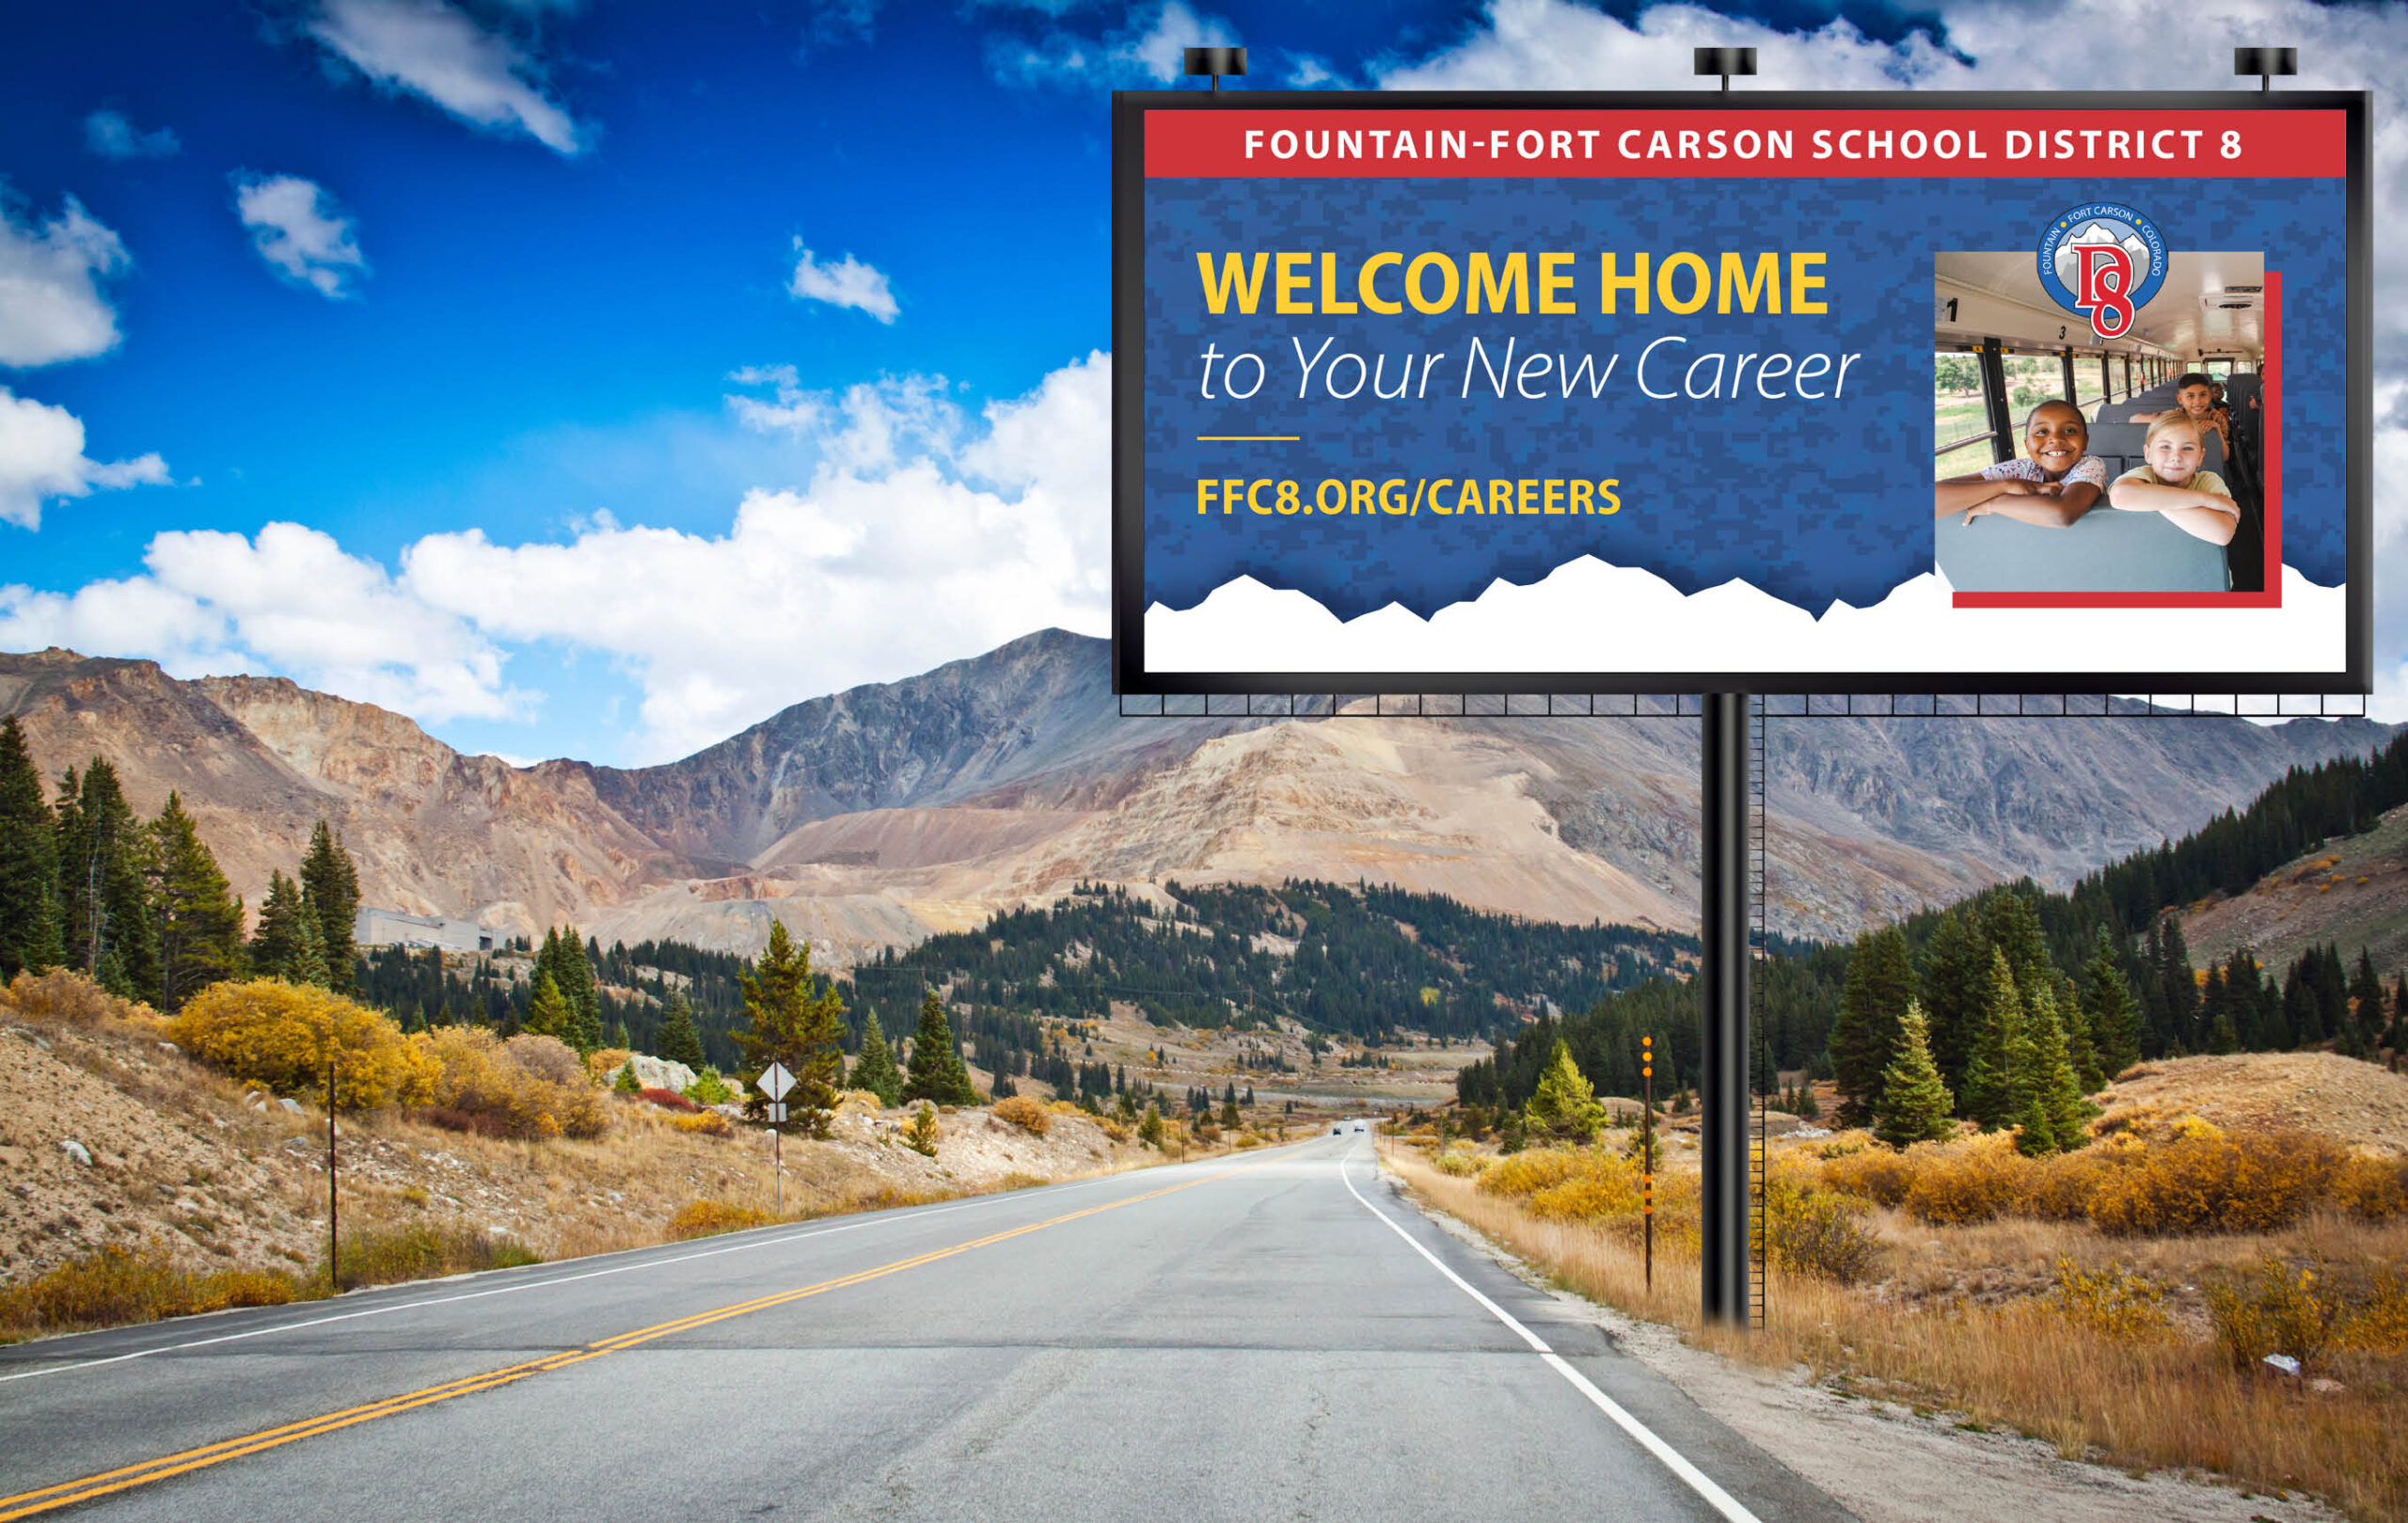 A welcoming, inspiring billboard recruiting for Fountain-Fort Carson School District 8, reading "Welcome Home to Your New Career."